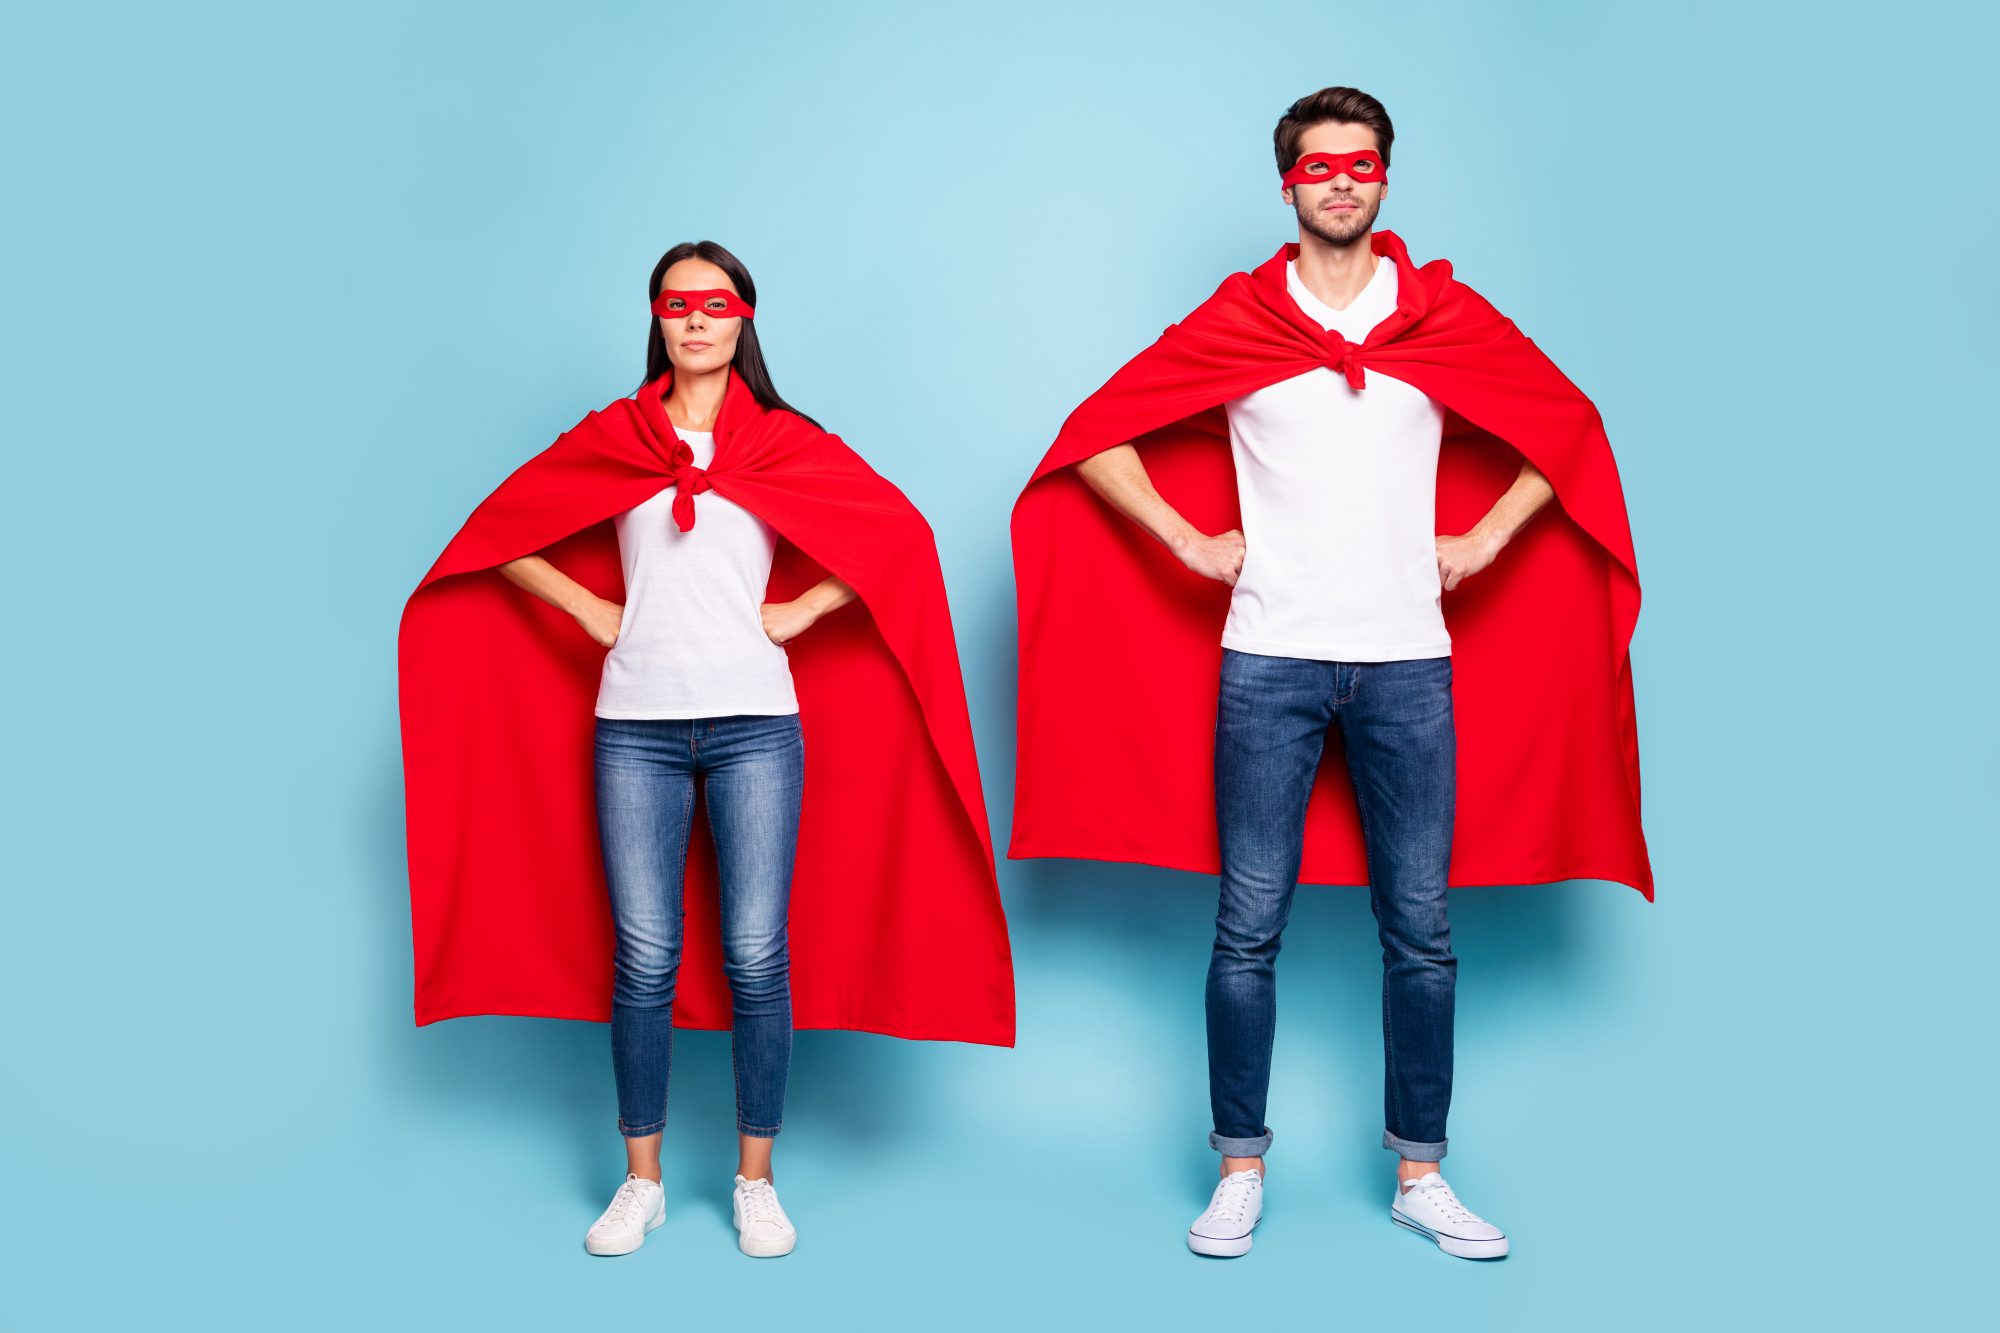 Does the 'Superhero' pose actually make people feel more confident?